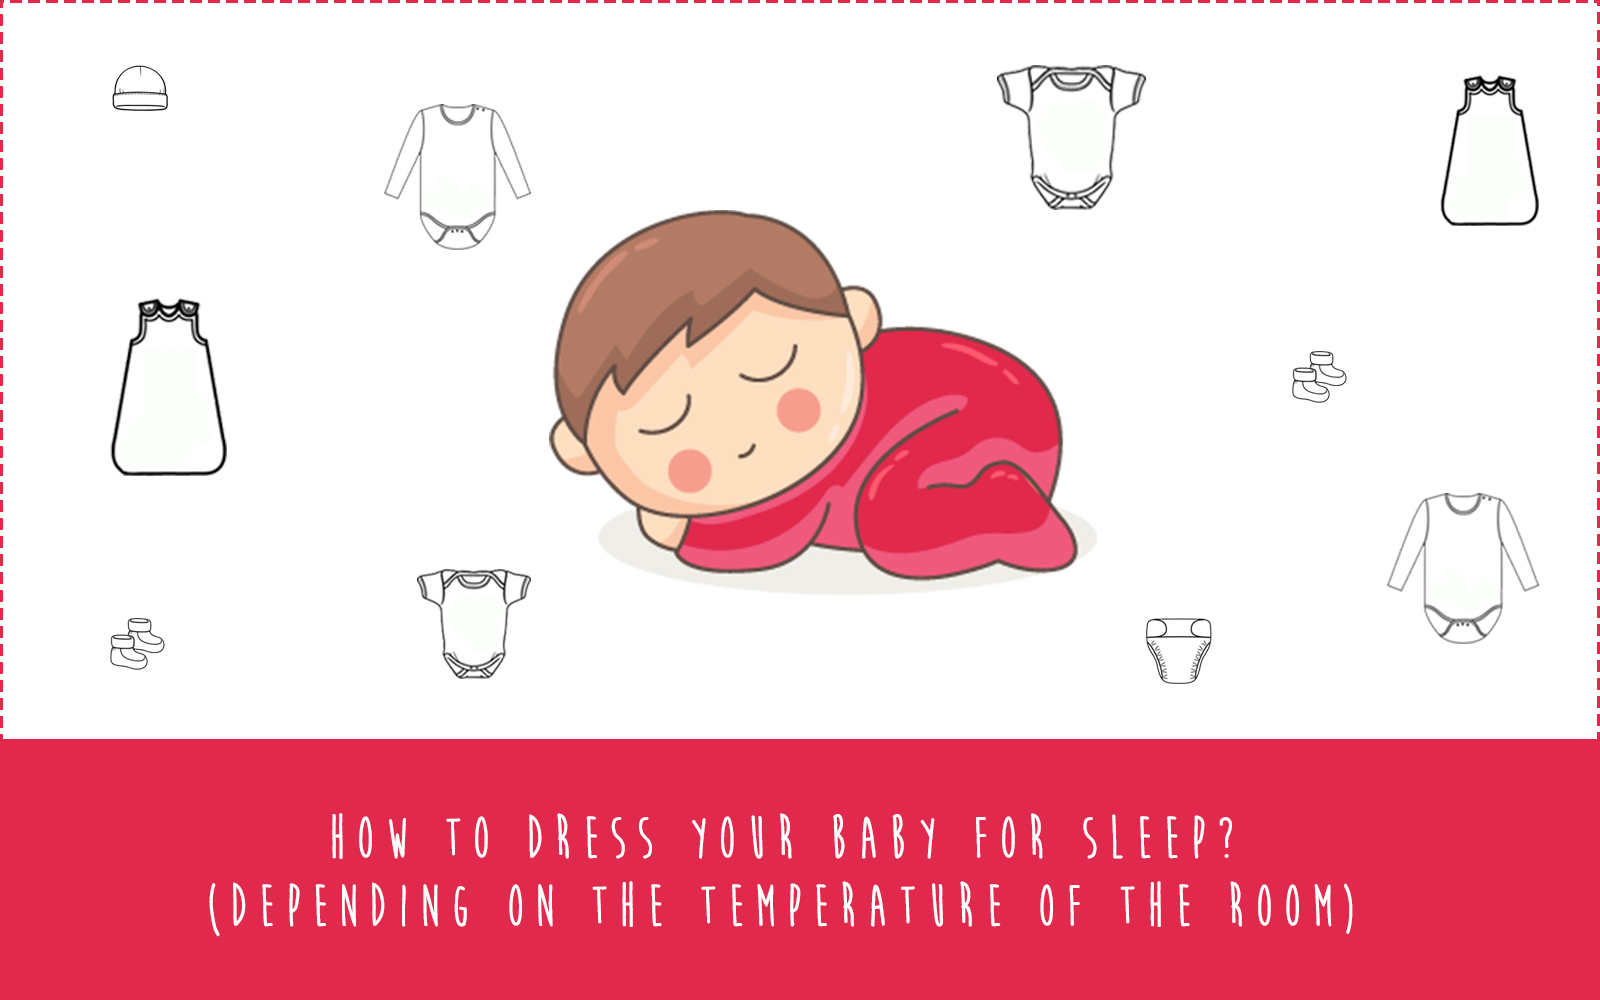 What To Dress Baby In For Sleep At Night Depending On The Temperature Of The Room Cooking For My Baby